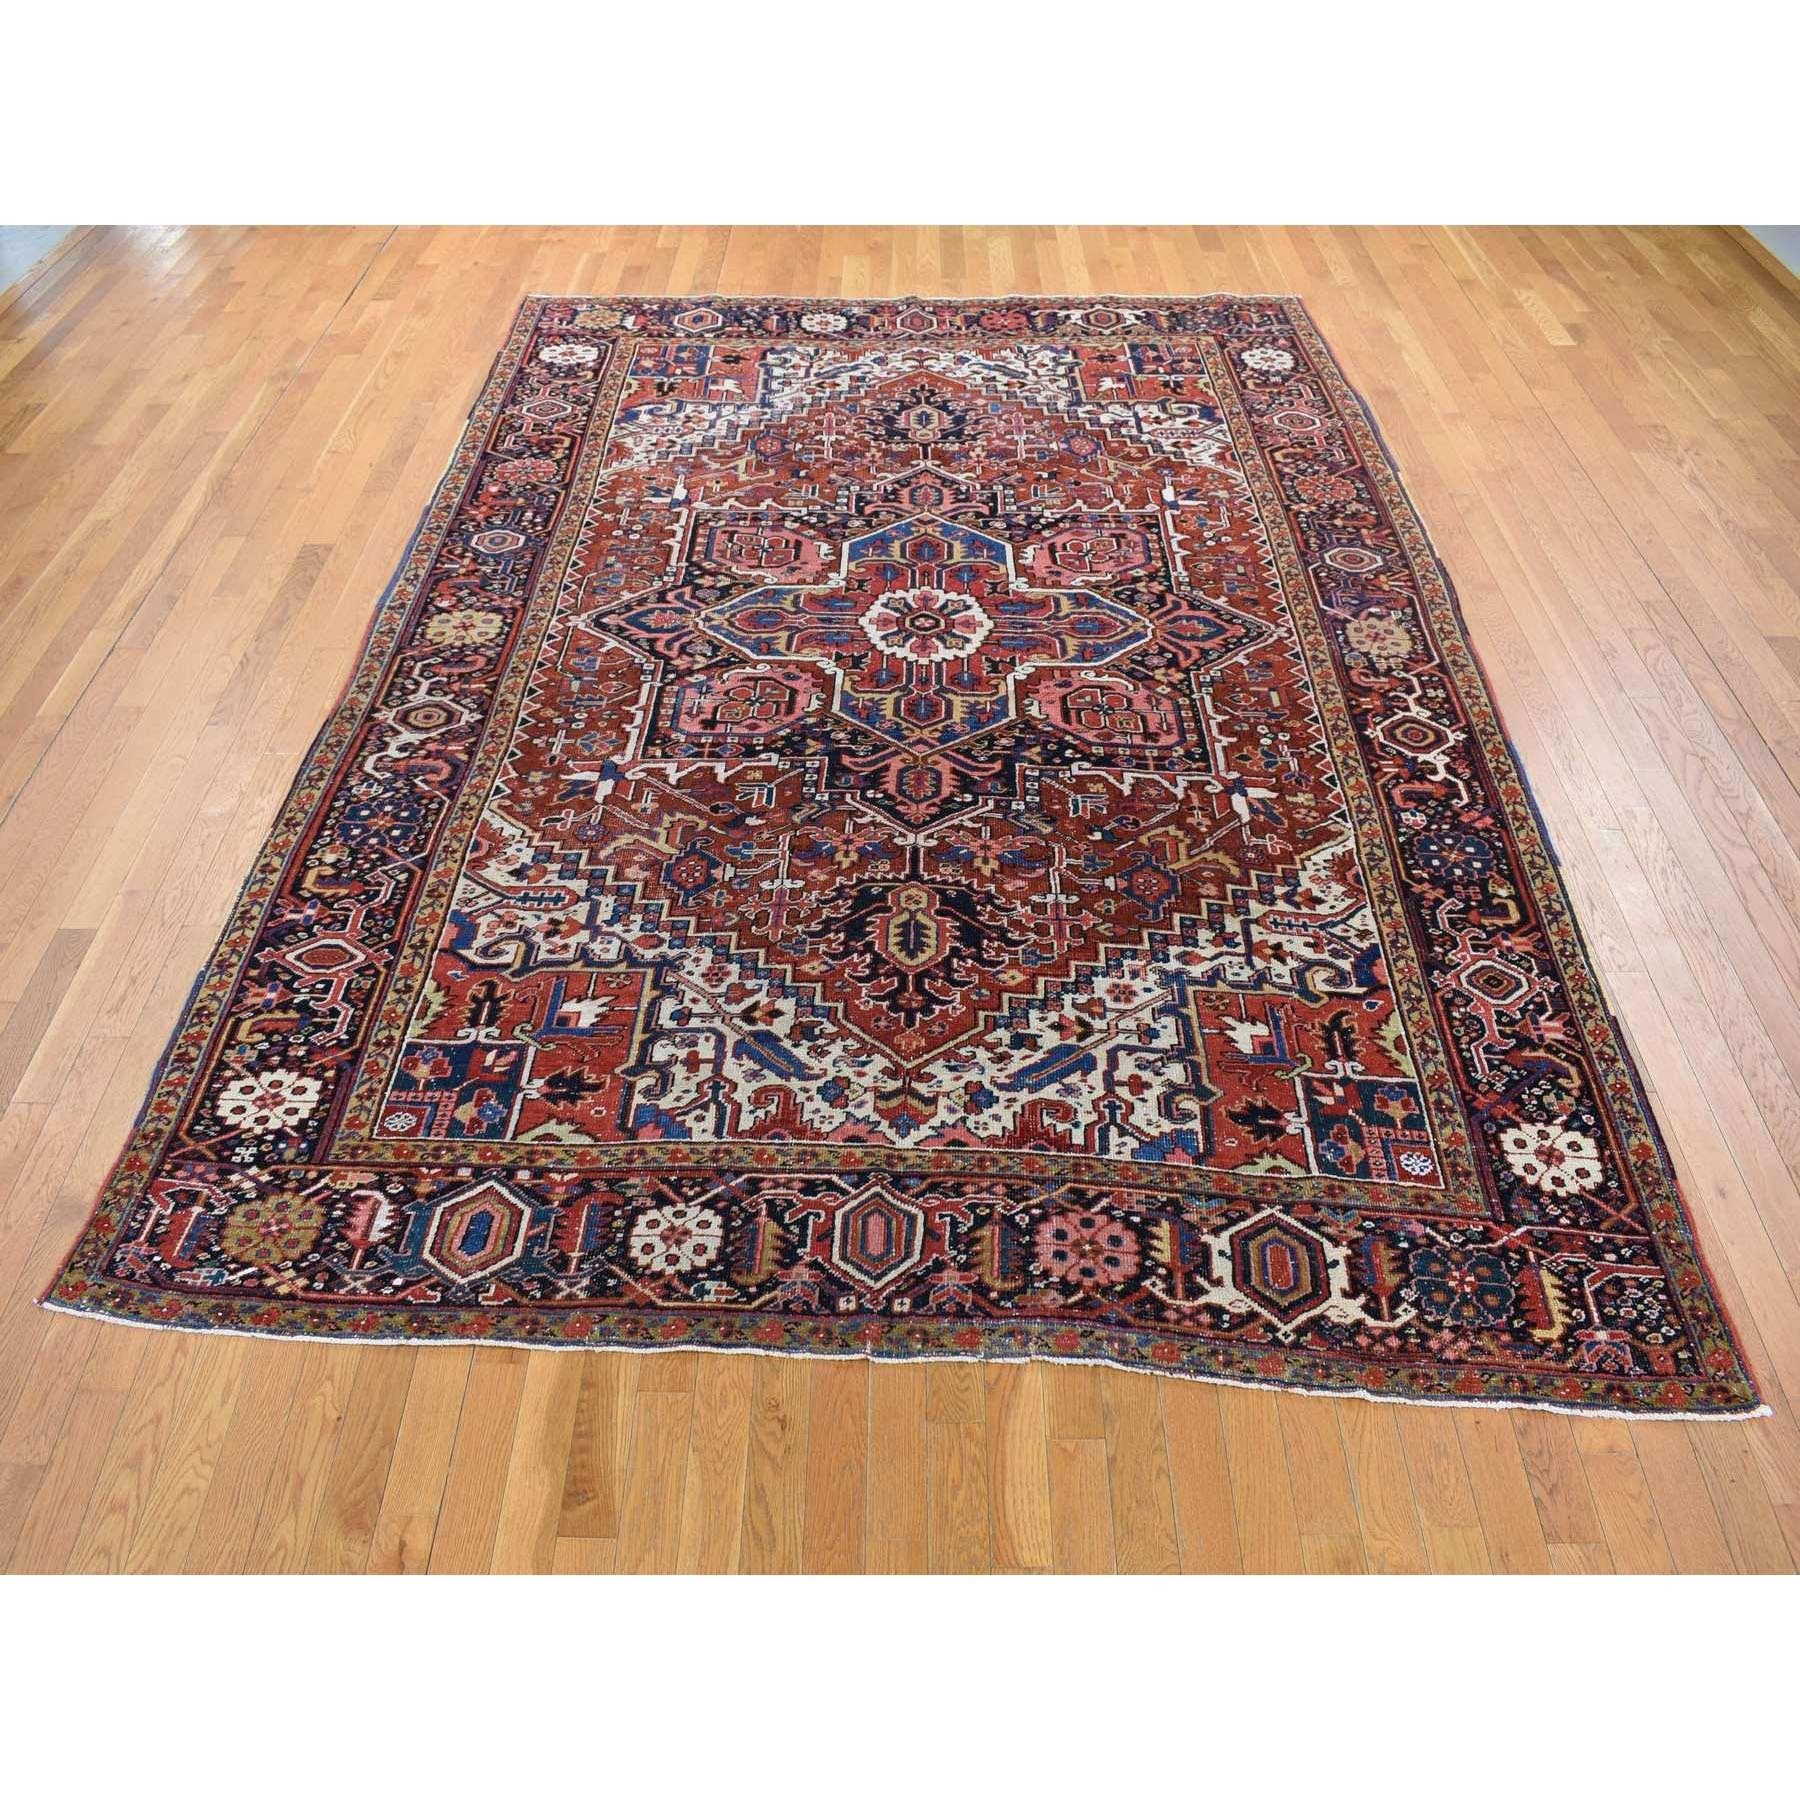 Medieval Rust Red Vintage Persian Heriz with Some Wear Clean Soft Wool Hand Knotted Rug